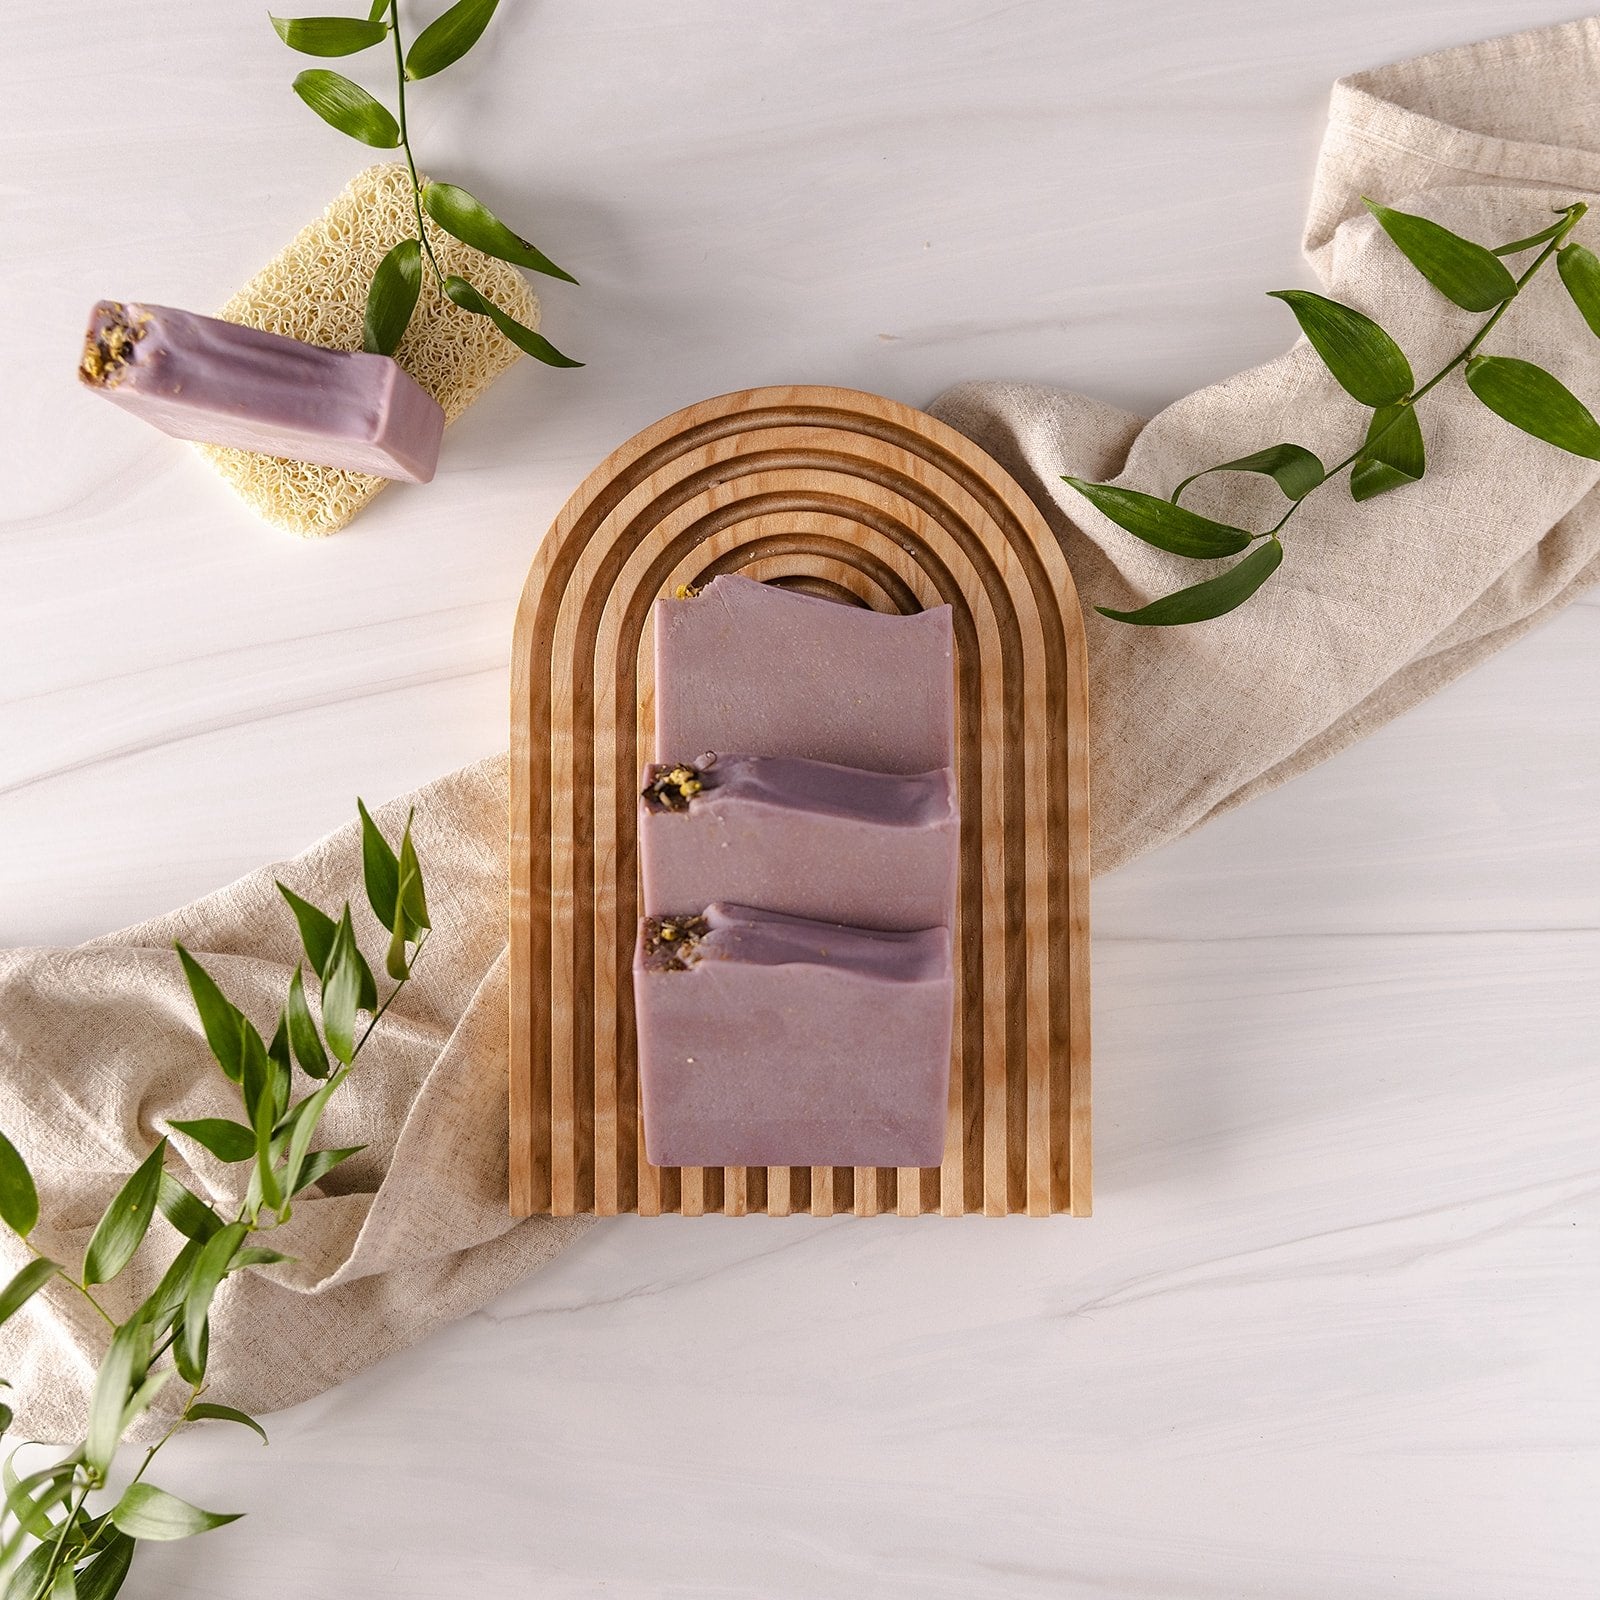 Lavender and Chamomile Artisan Soap